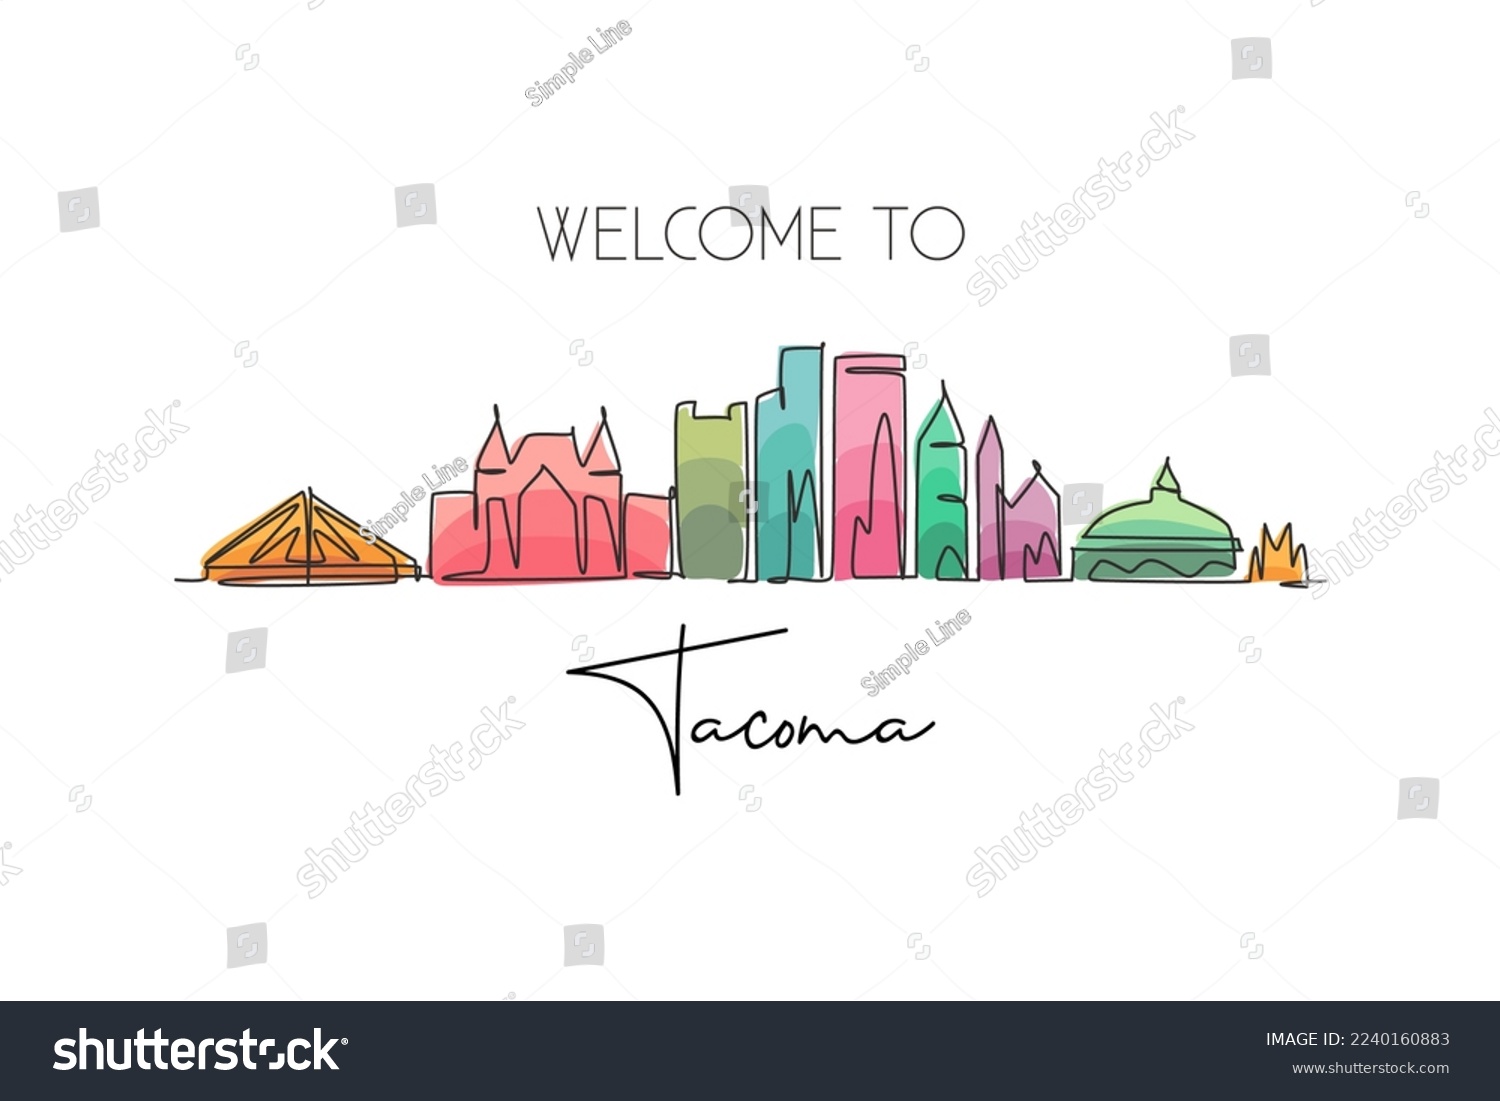 SVG of Single continuous line drawing of Tacoma city skyline, Washington. Famous city scraper landscape. World travel home wall decor art poster print concept. Modern one line draw design vector illustration svg